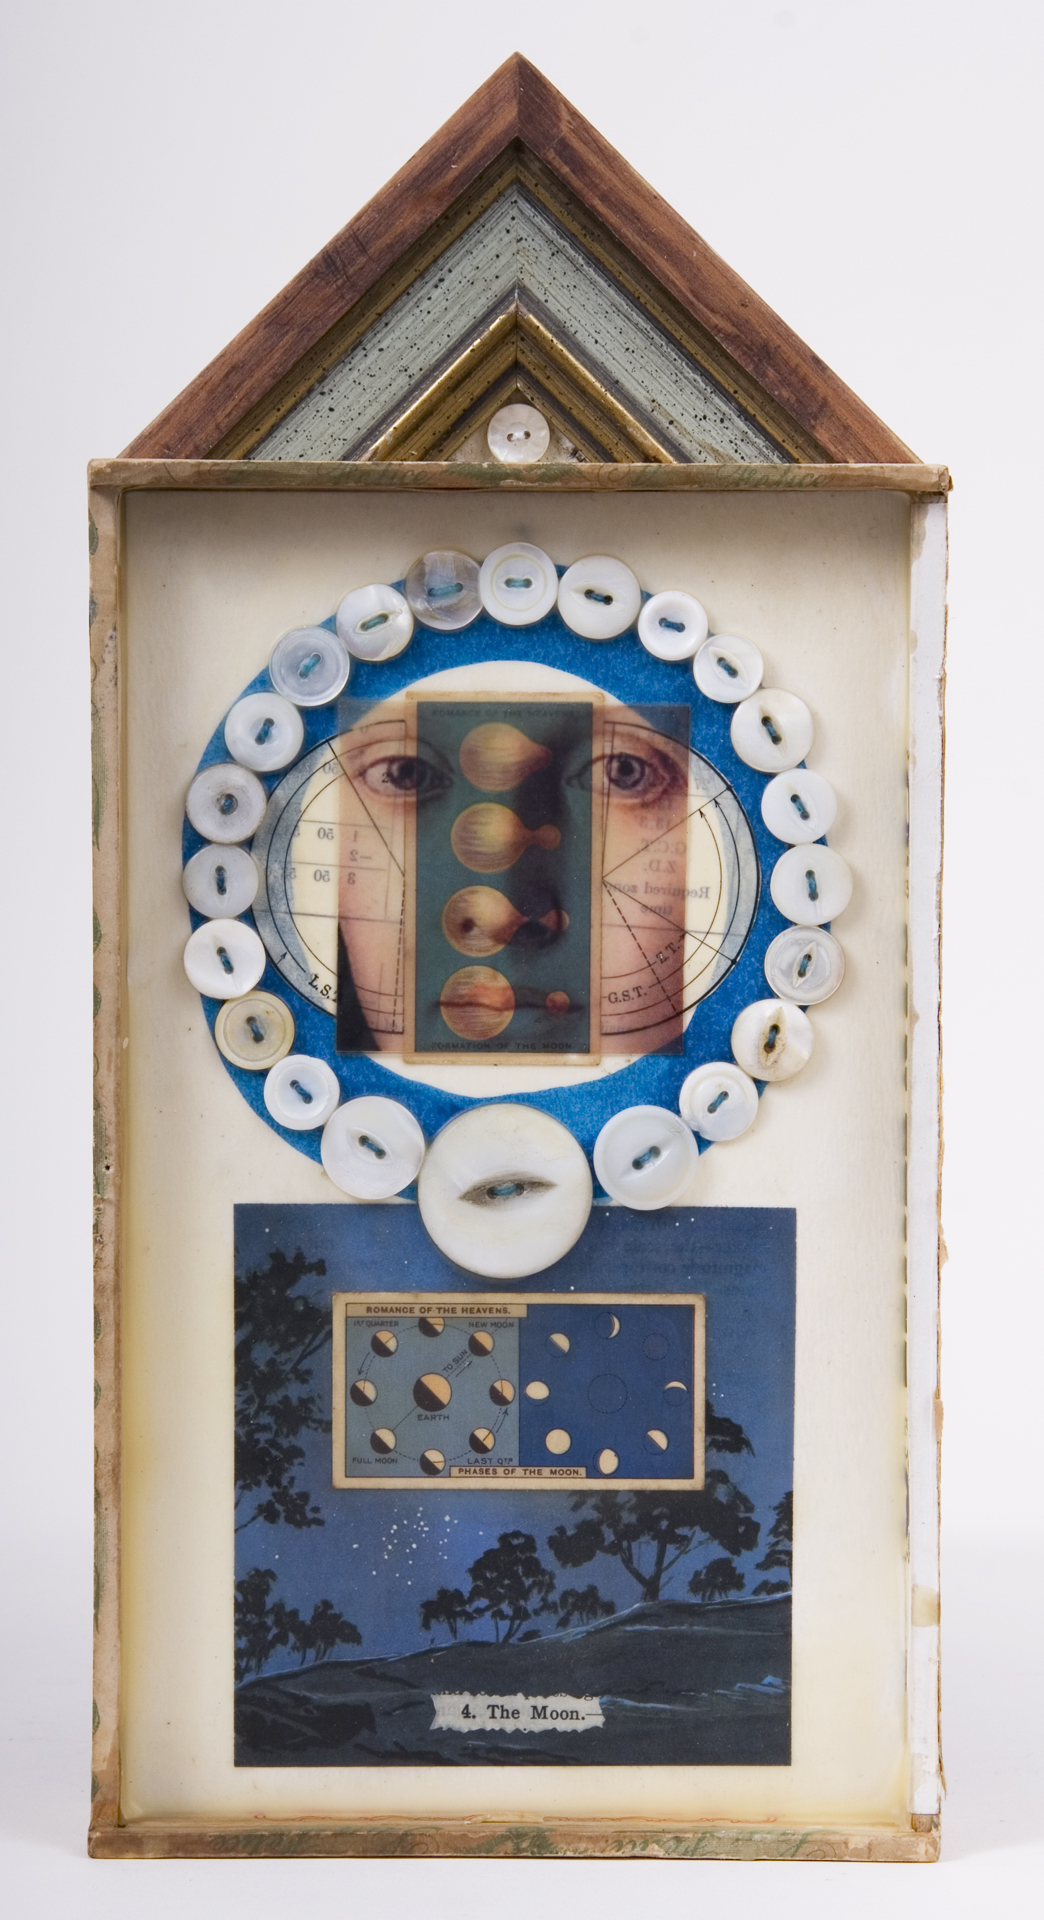    \"4. The Moon\"
    mixed-media assemblage
    12.75 x 6 x 2
    2009
    SOLD
    Cigar box, frame sample, birch bark, mother of pearl buttons, fortune & tobac cards, transparency, ink, wax, astronomy text on watercolor paper